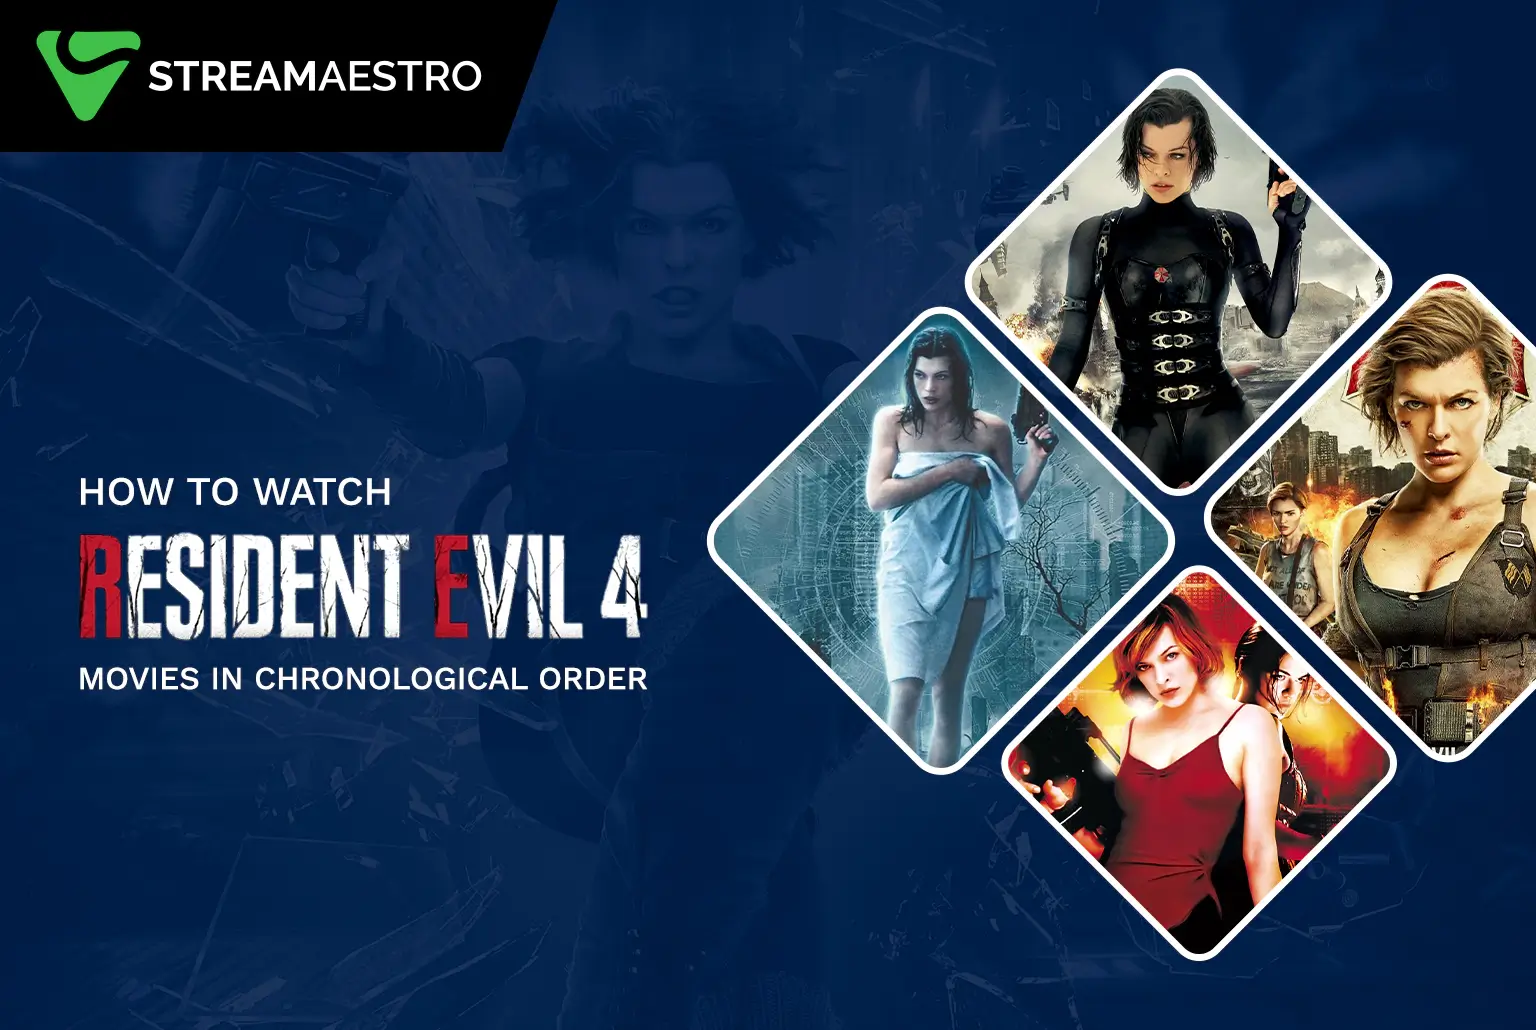 Watch Resident Evil Movies in Chronological Order